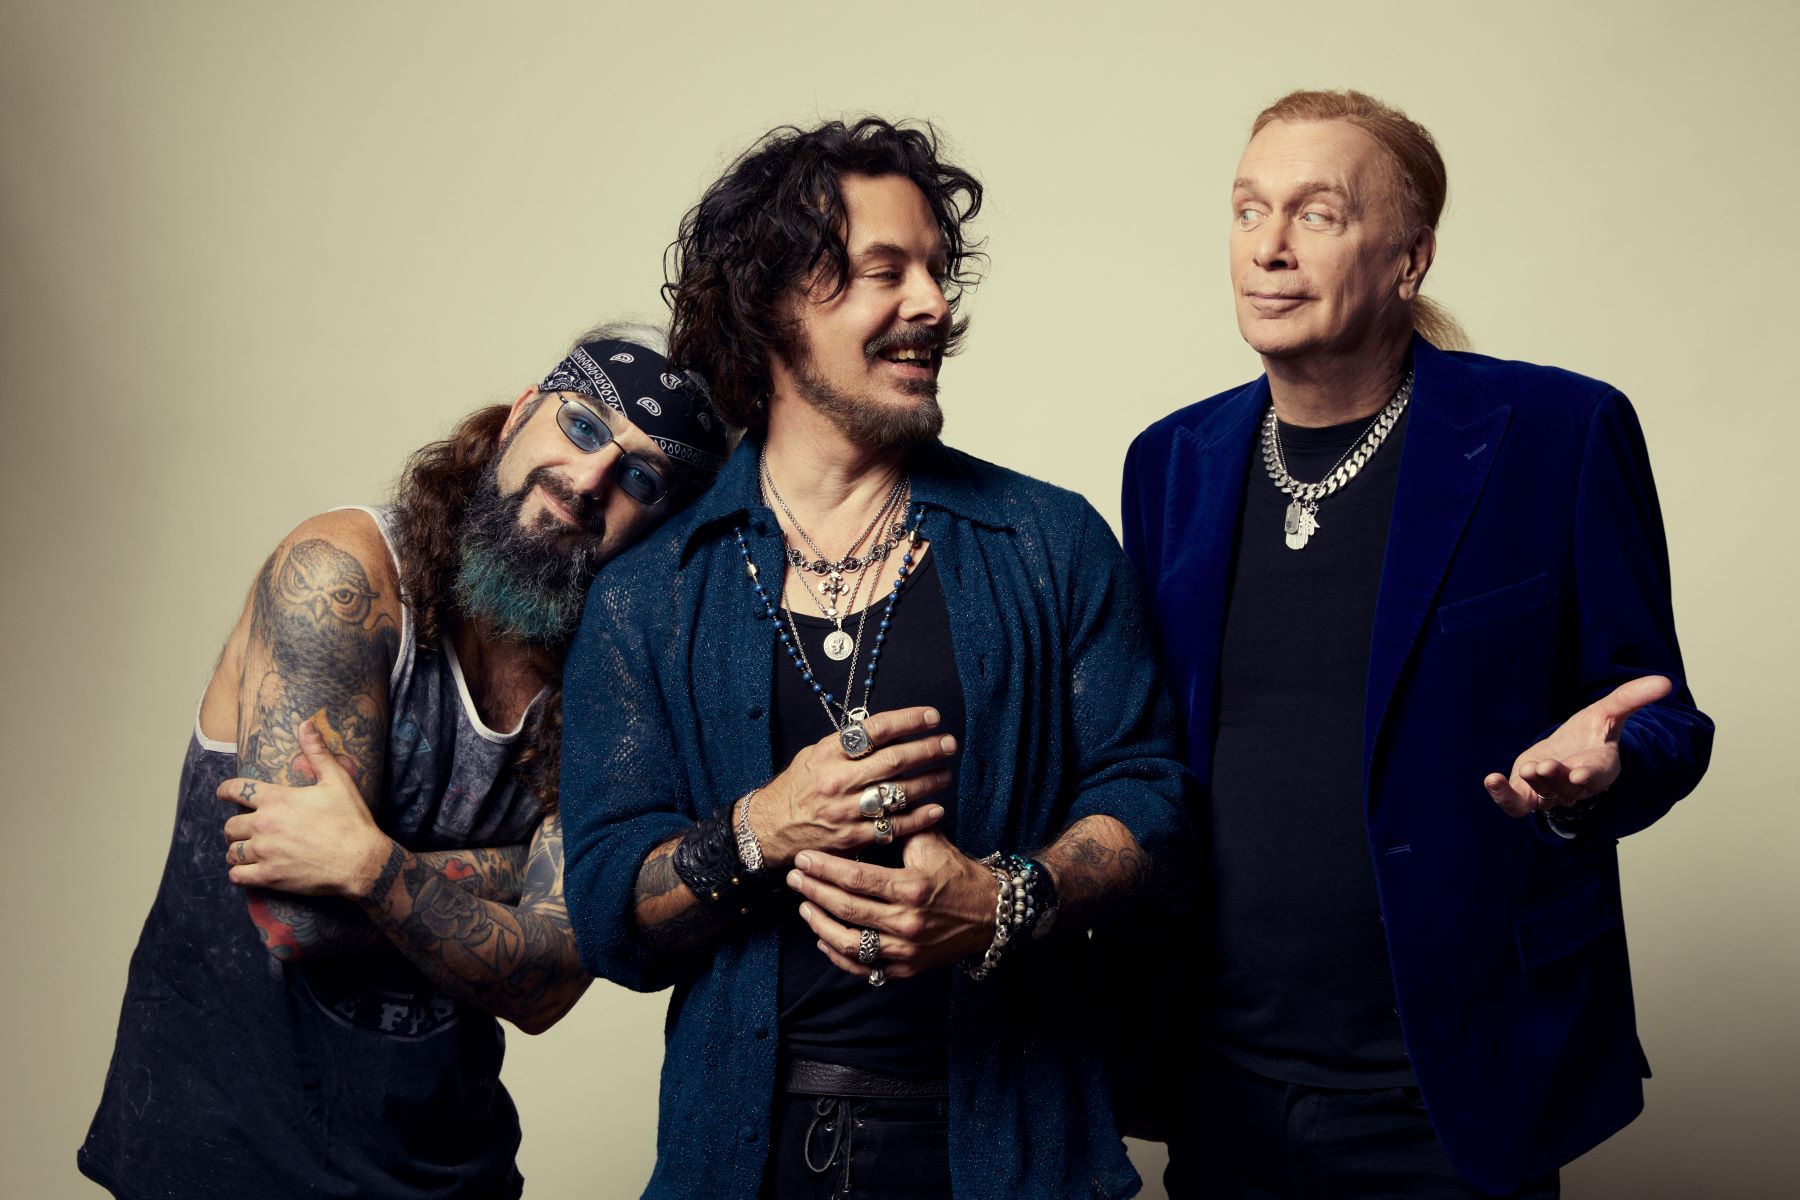 THE WINERY DOGS release new song and video, 'MAD WORLD' from new album